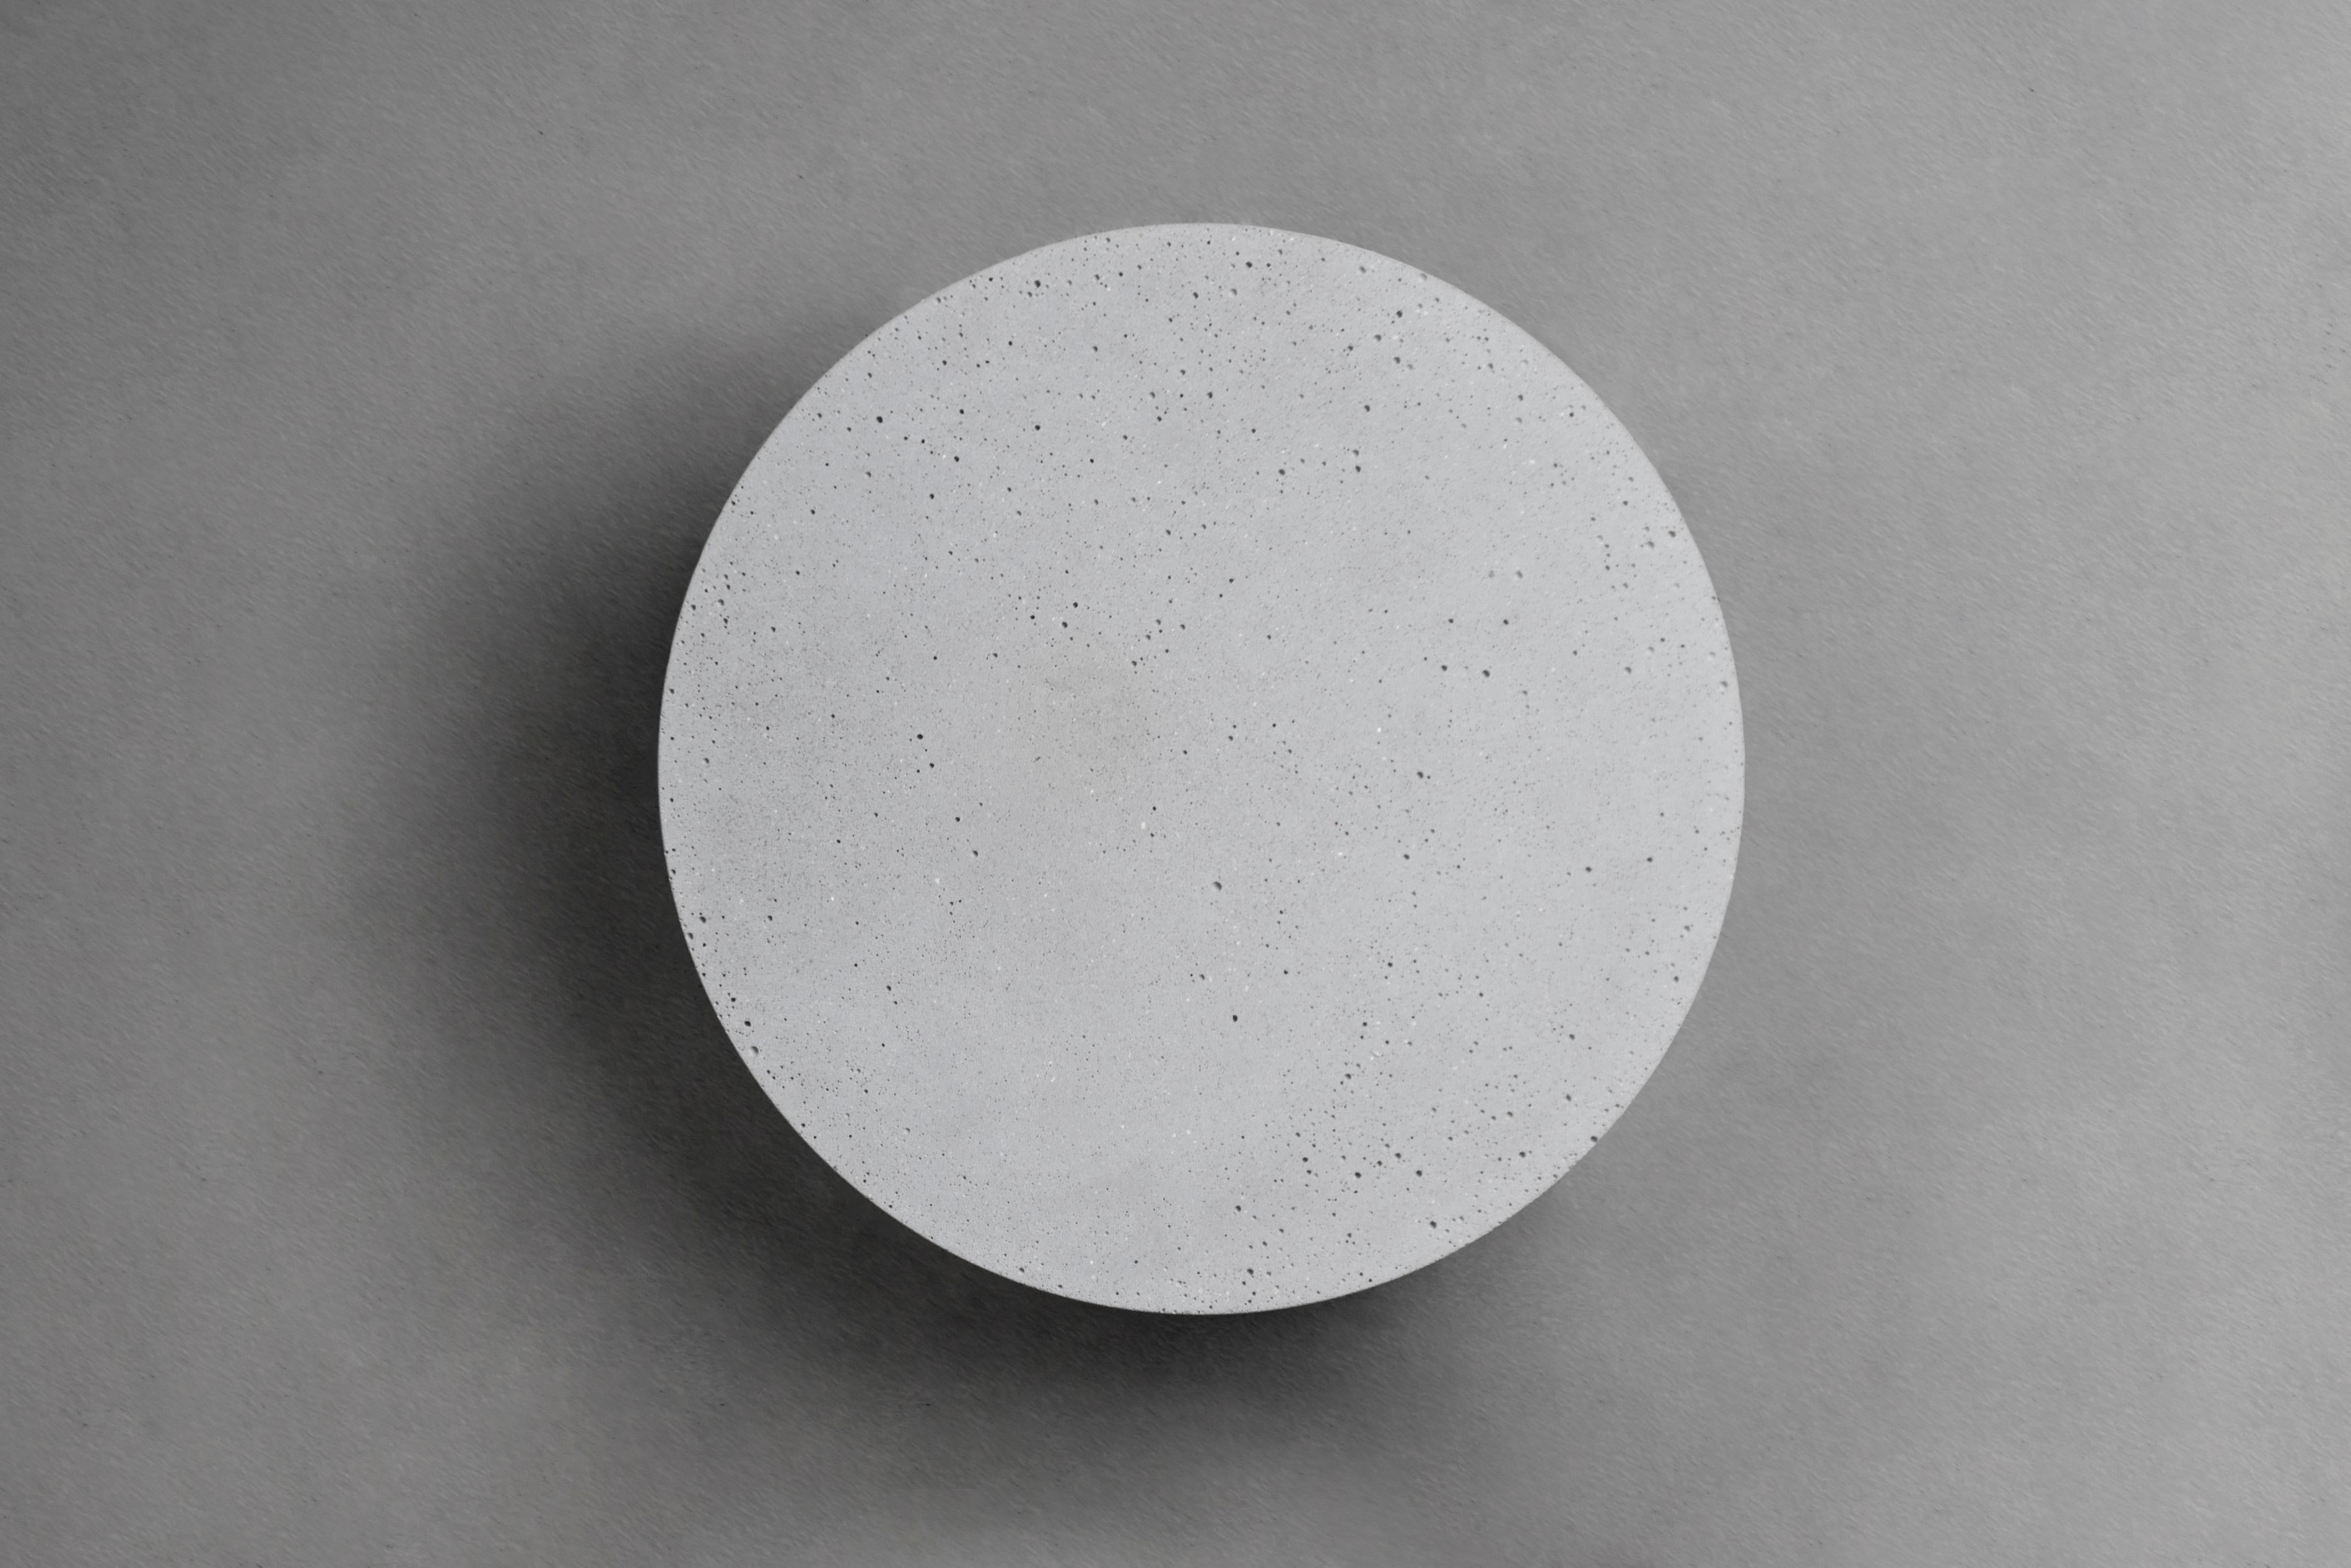 Concrete and Acrylic Wall Lamp, “Pin, ” L, from Concrete Collection by Bentu